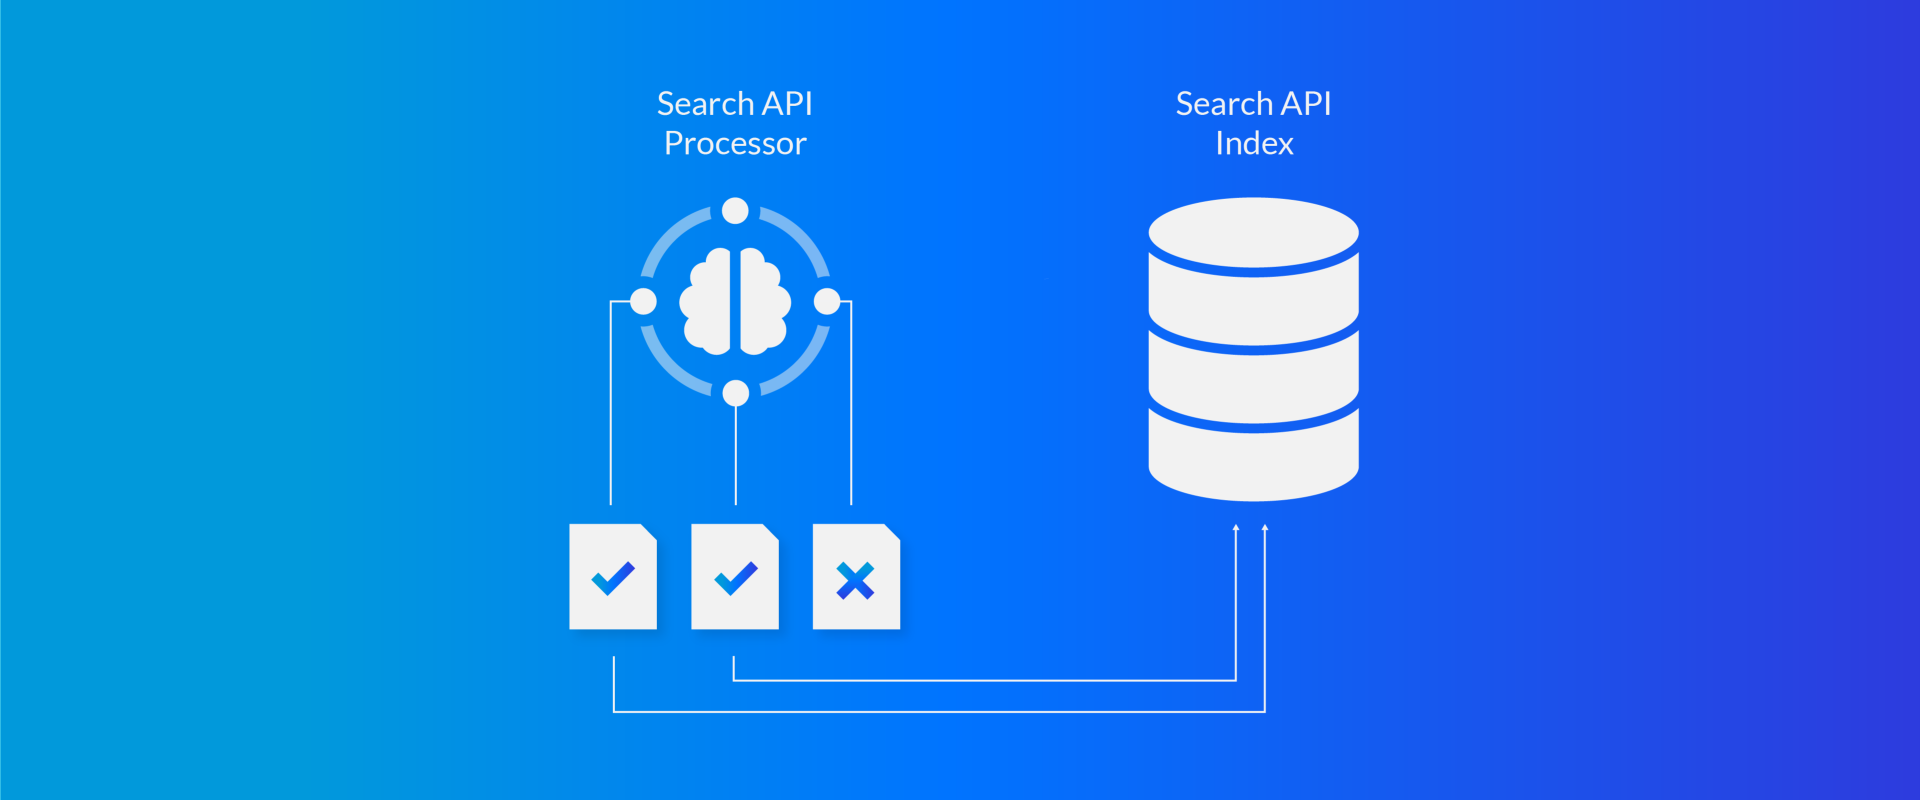 Search API: How to Prevent Items from Being Indexed